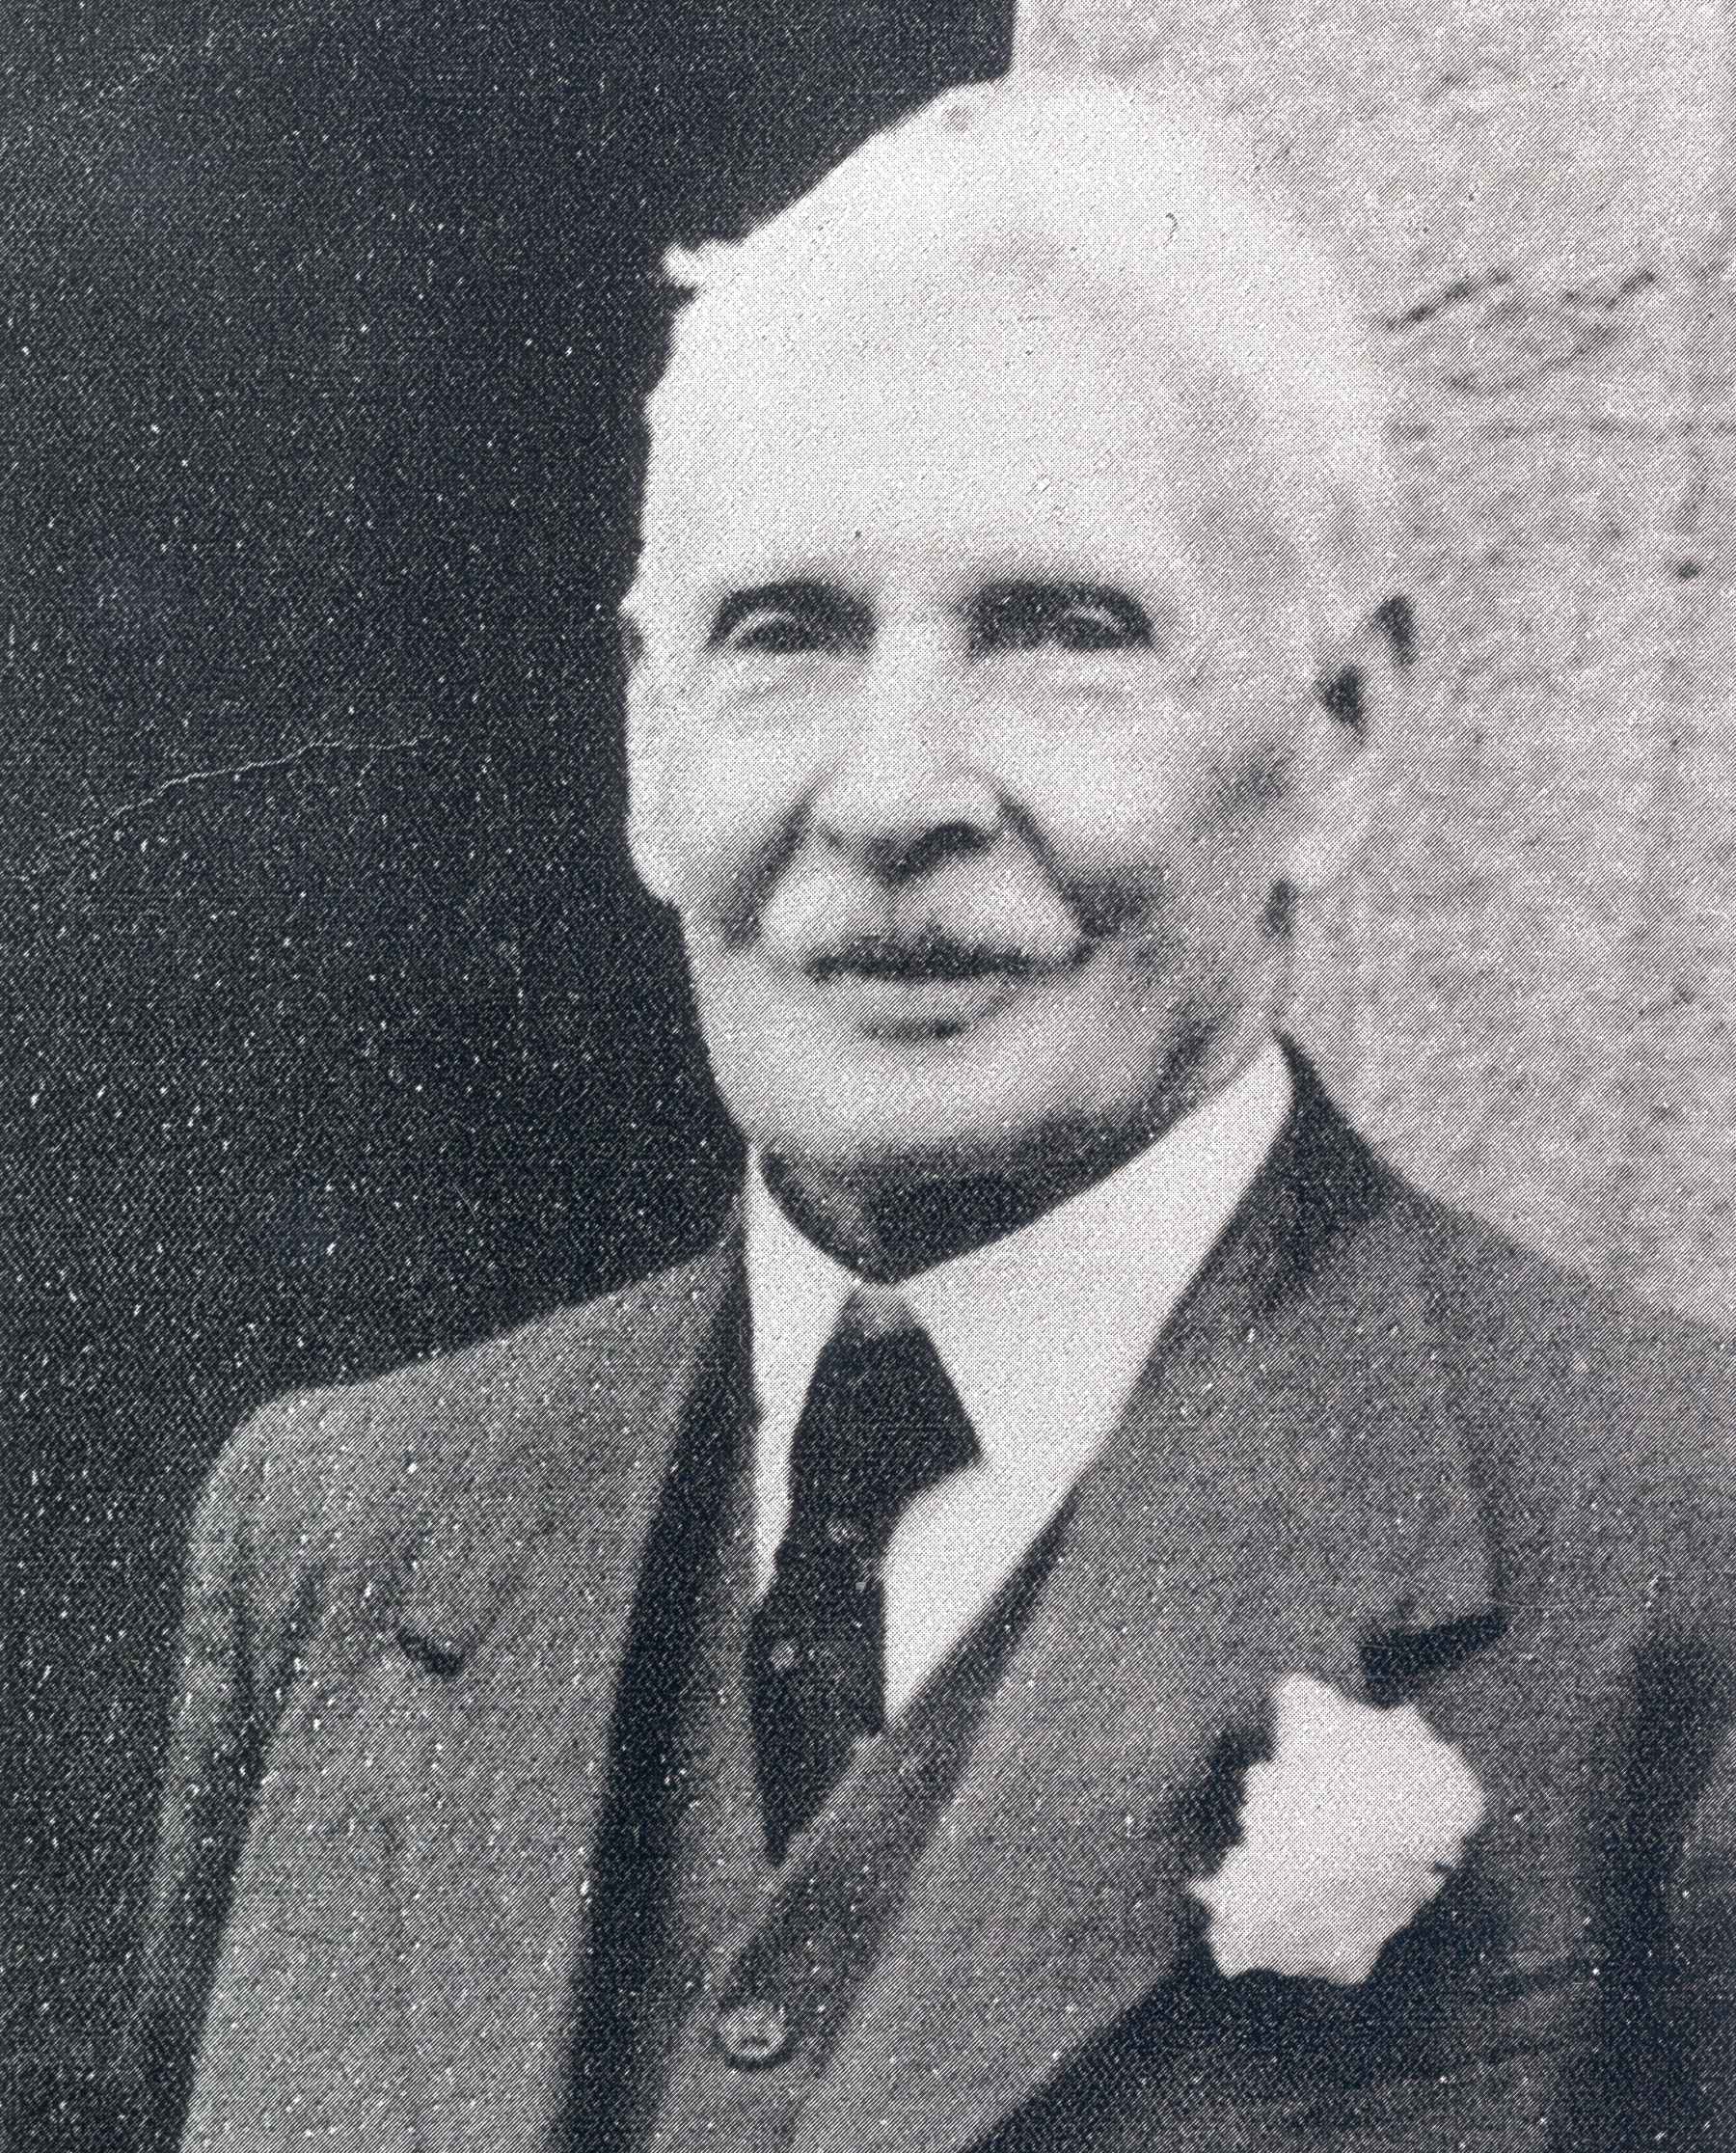 R S Waring, photo courtesy of the Lord Collection, n.d.